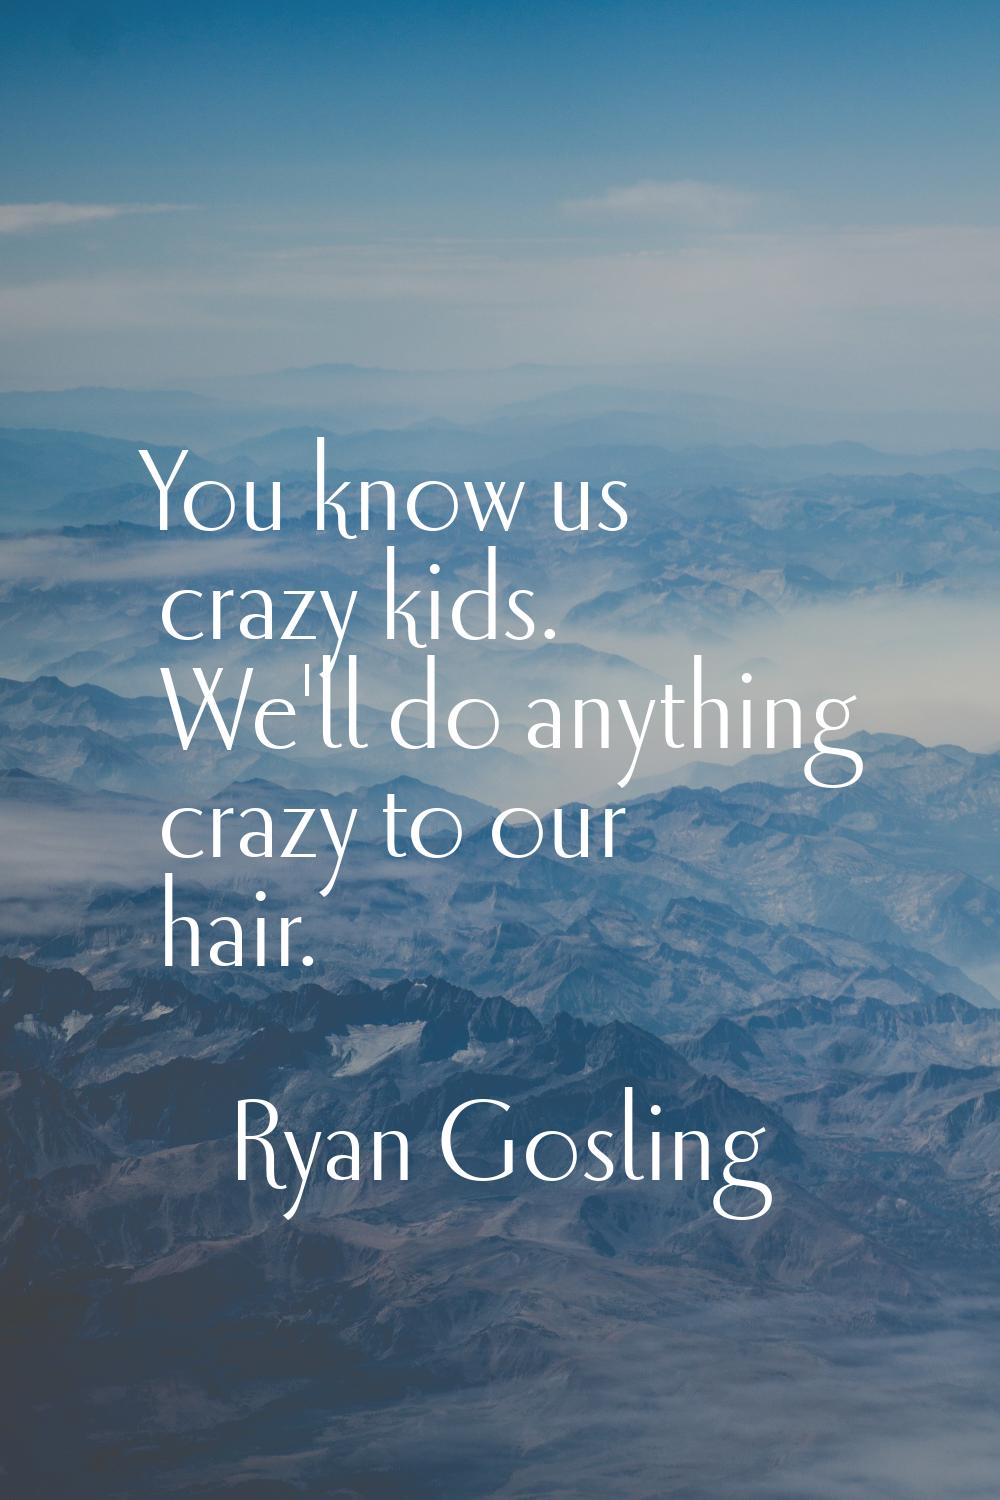 You know us crazy kids. We'll do anything crazy to our hair.